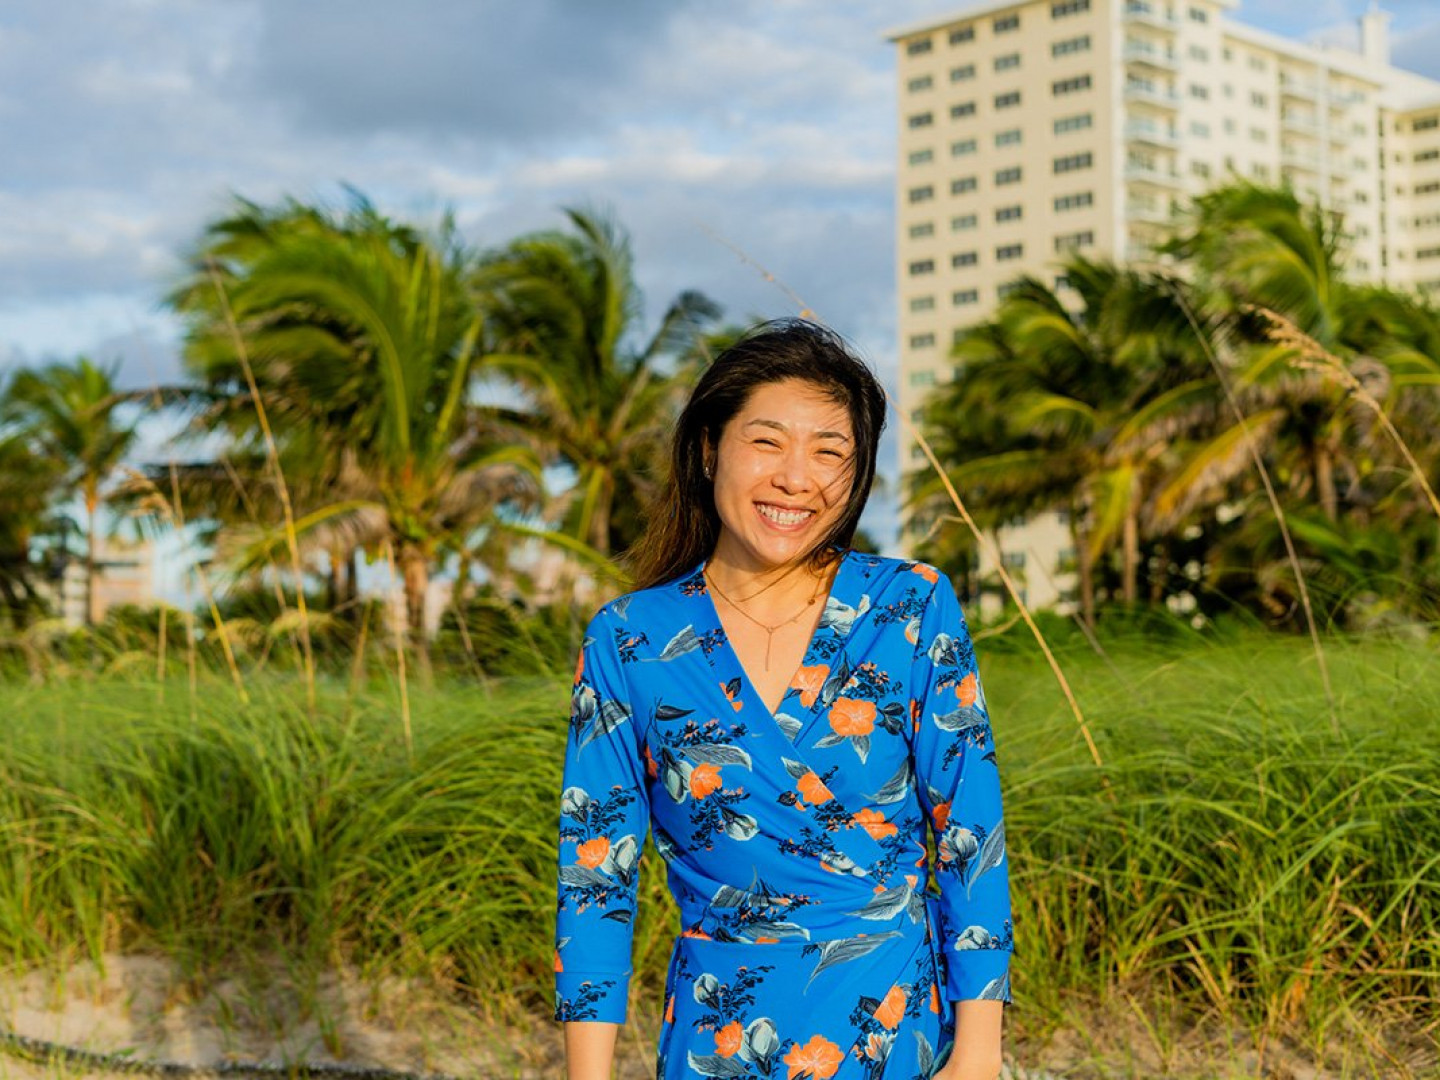 woman smiling at the camera with palm trees and a building in the background